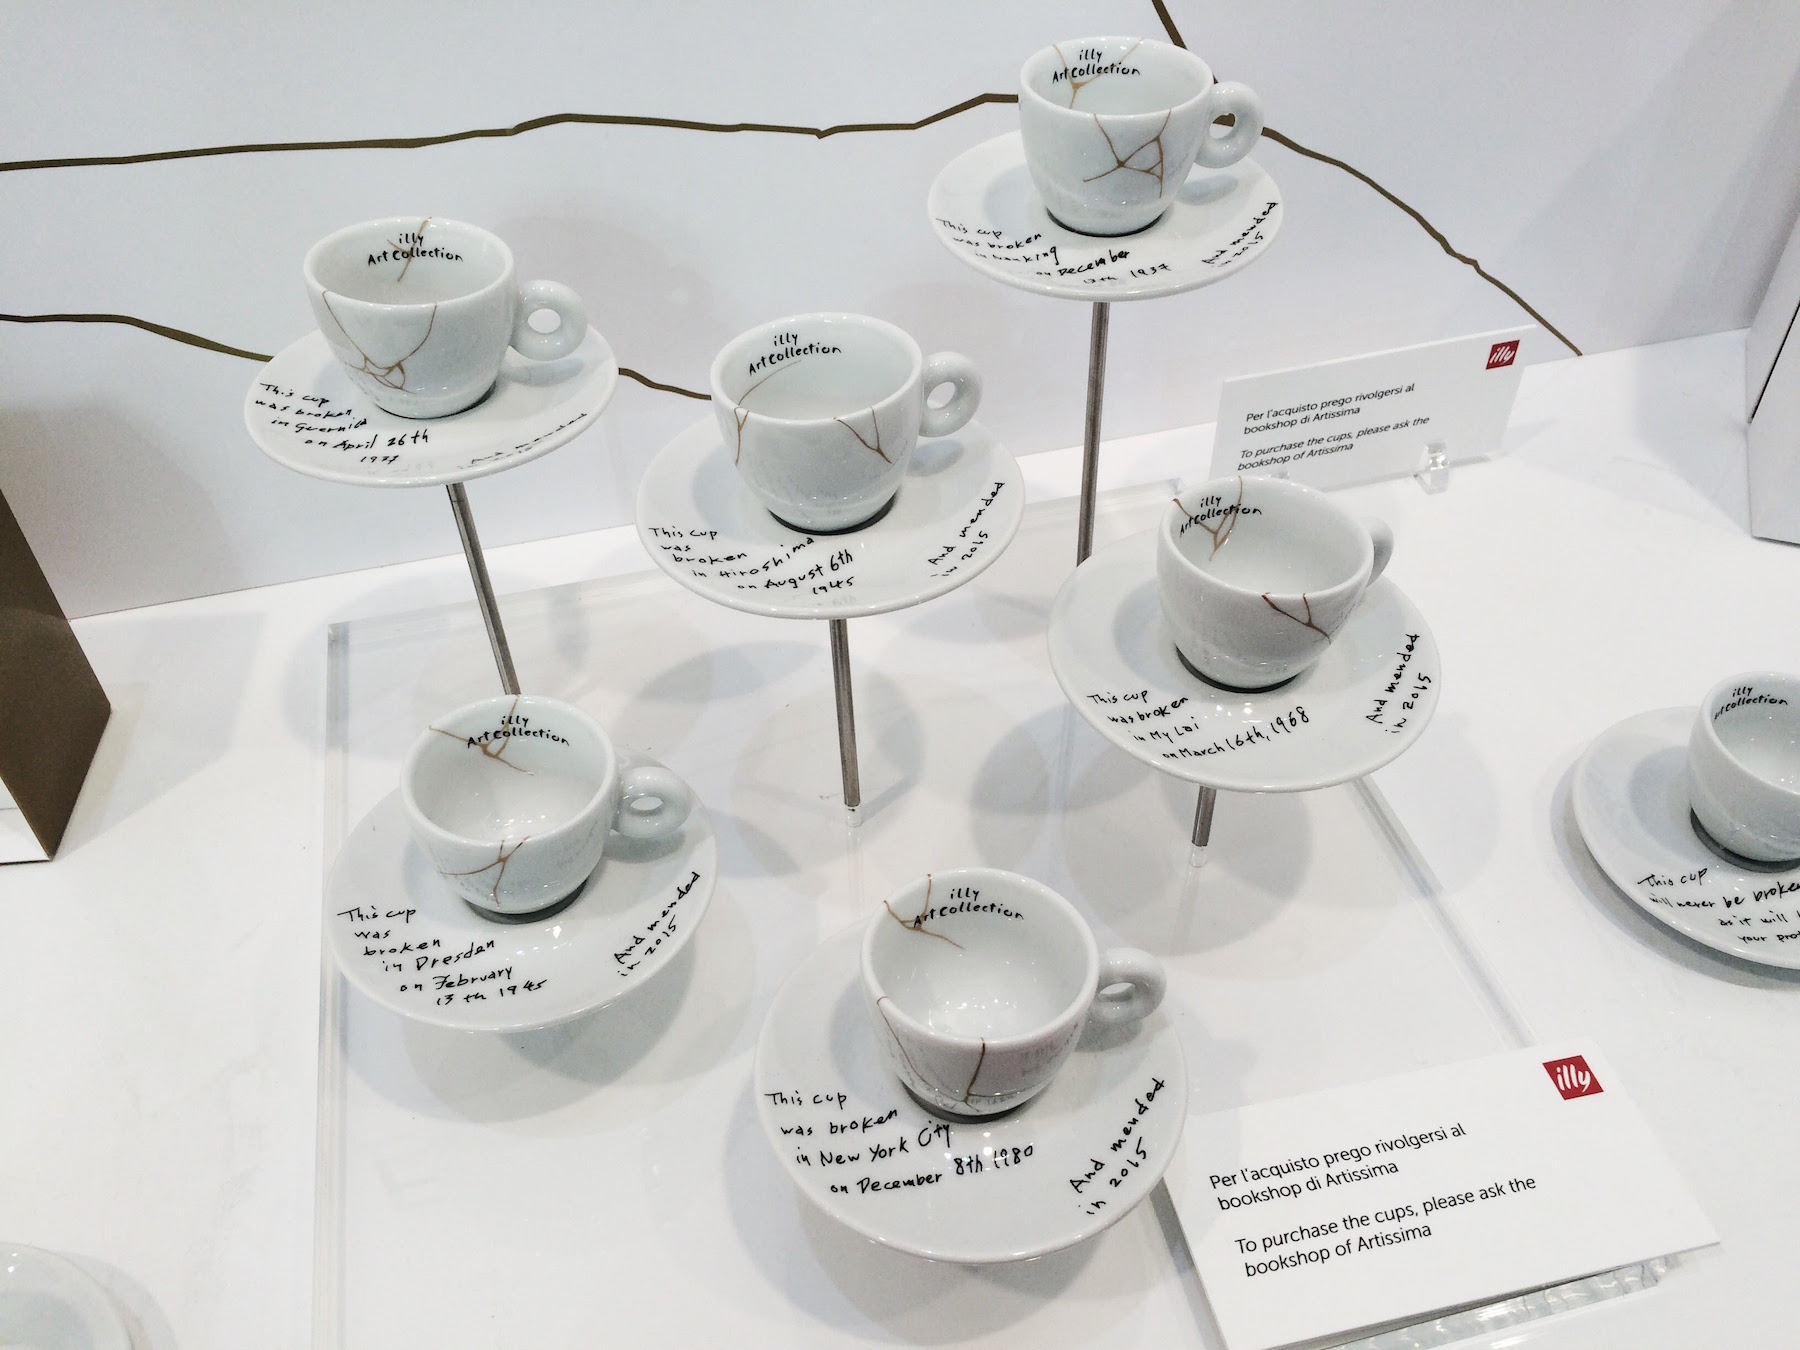 Illy Mended Cups by Yoko Ono